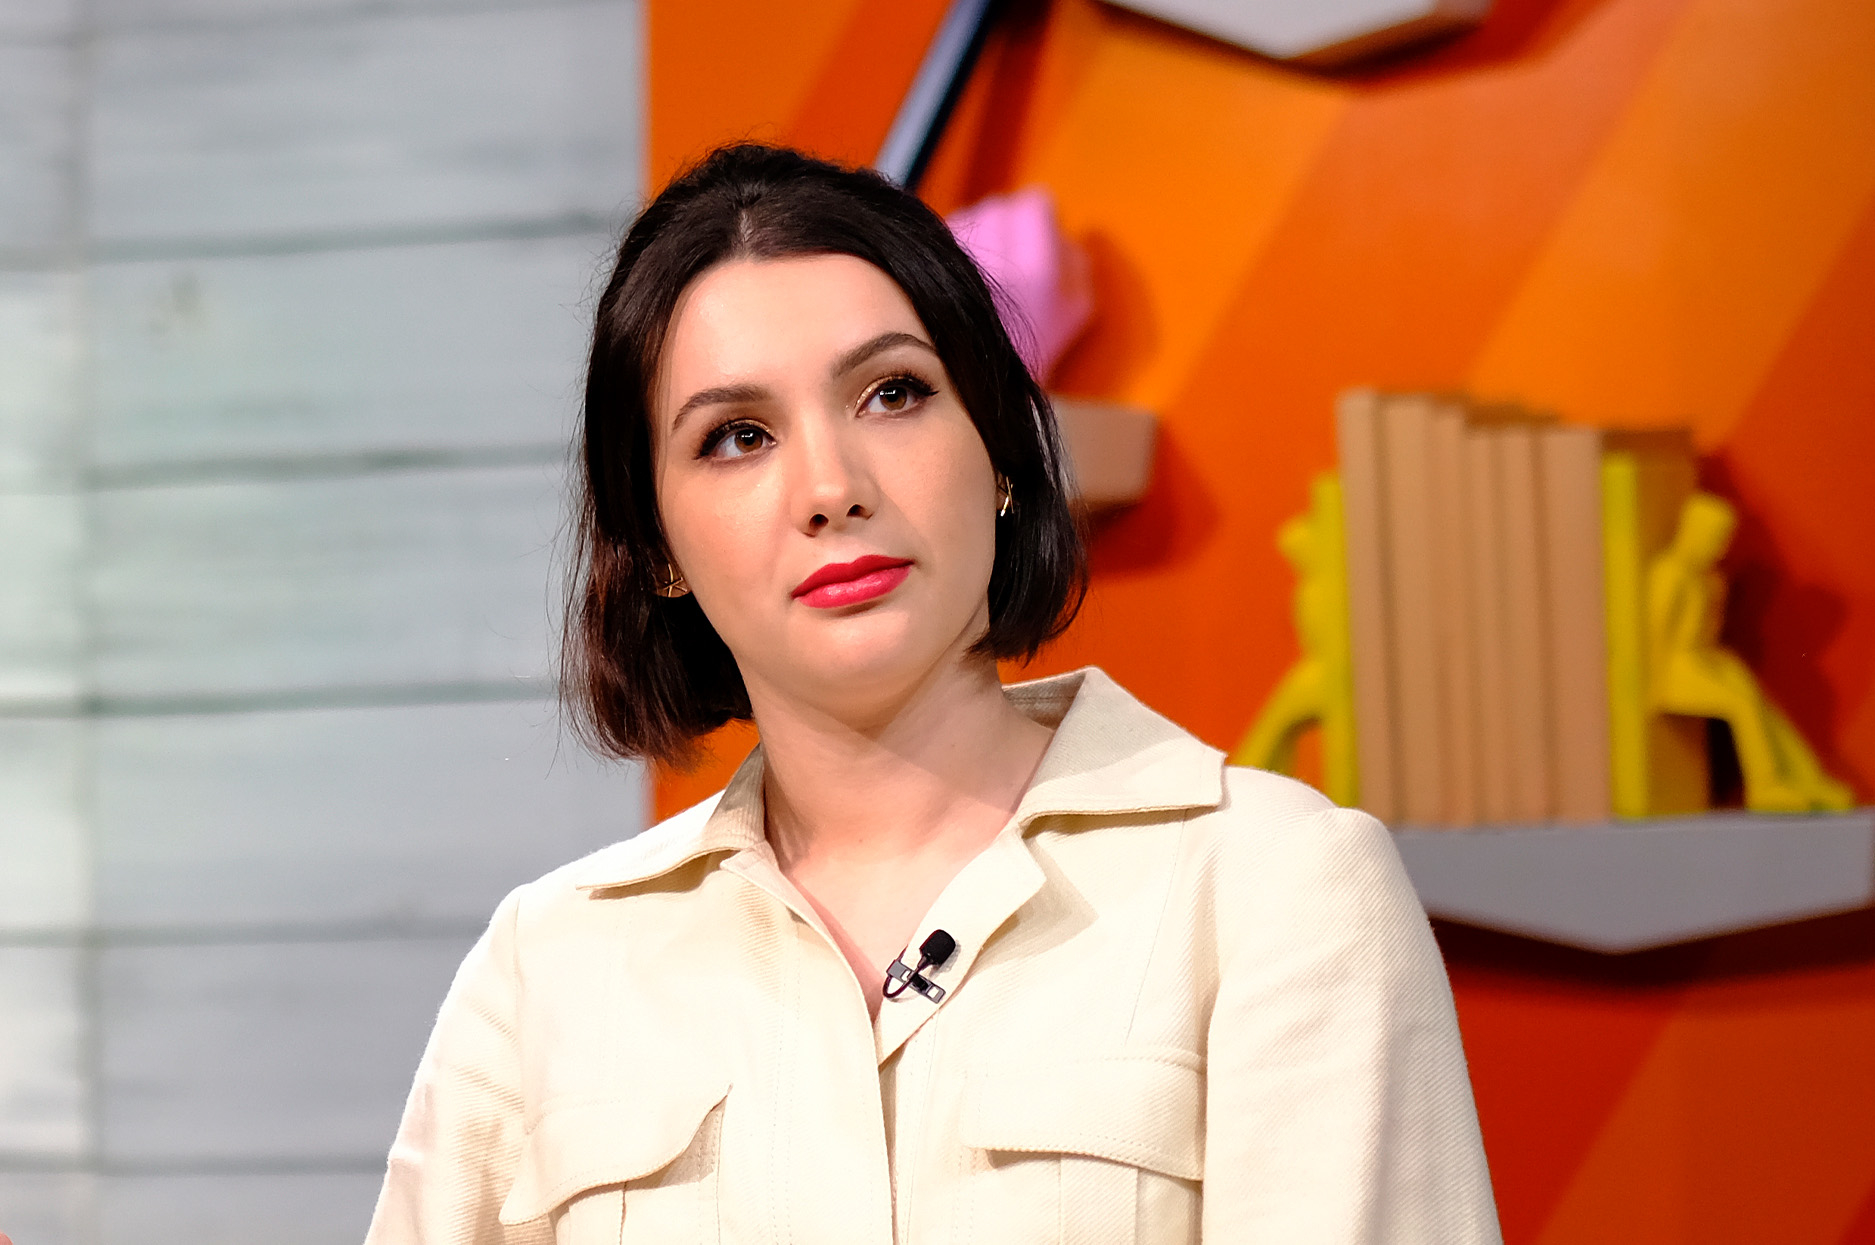 Hannah Marks in a beige jacket, on a set with various decor in the background